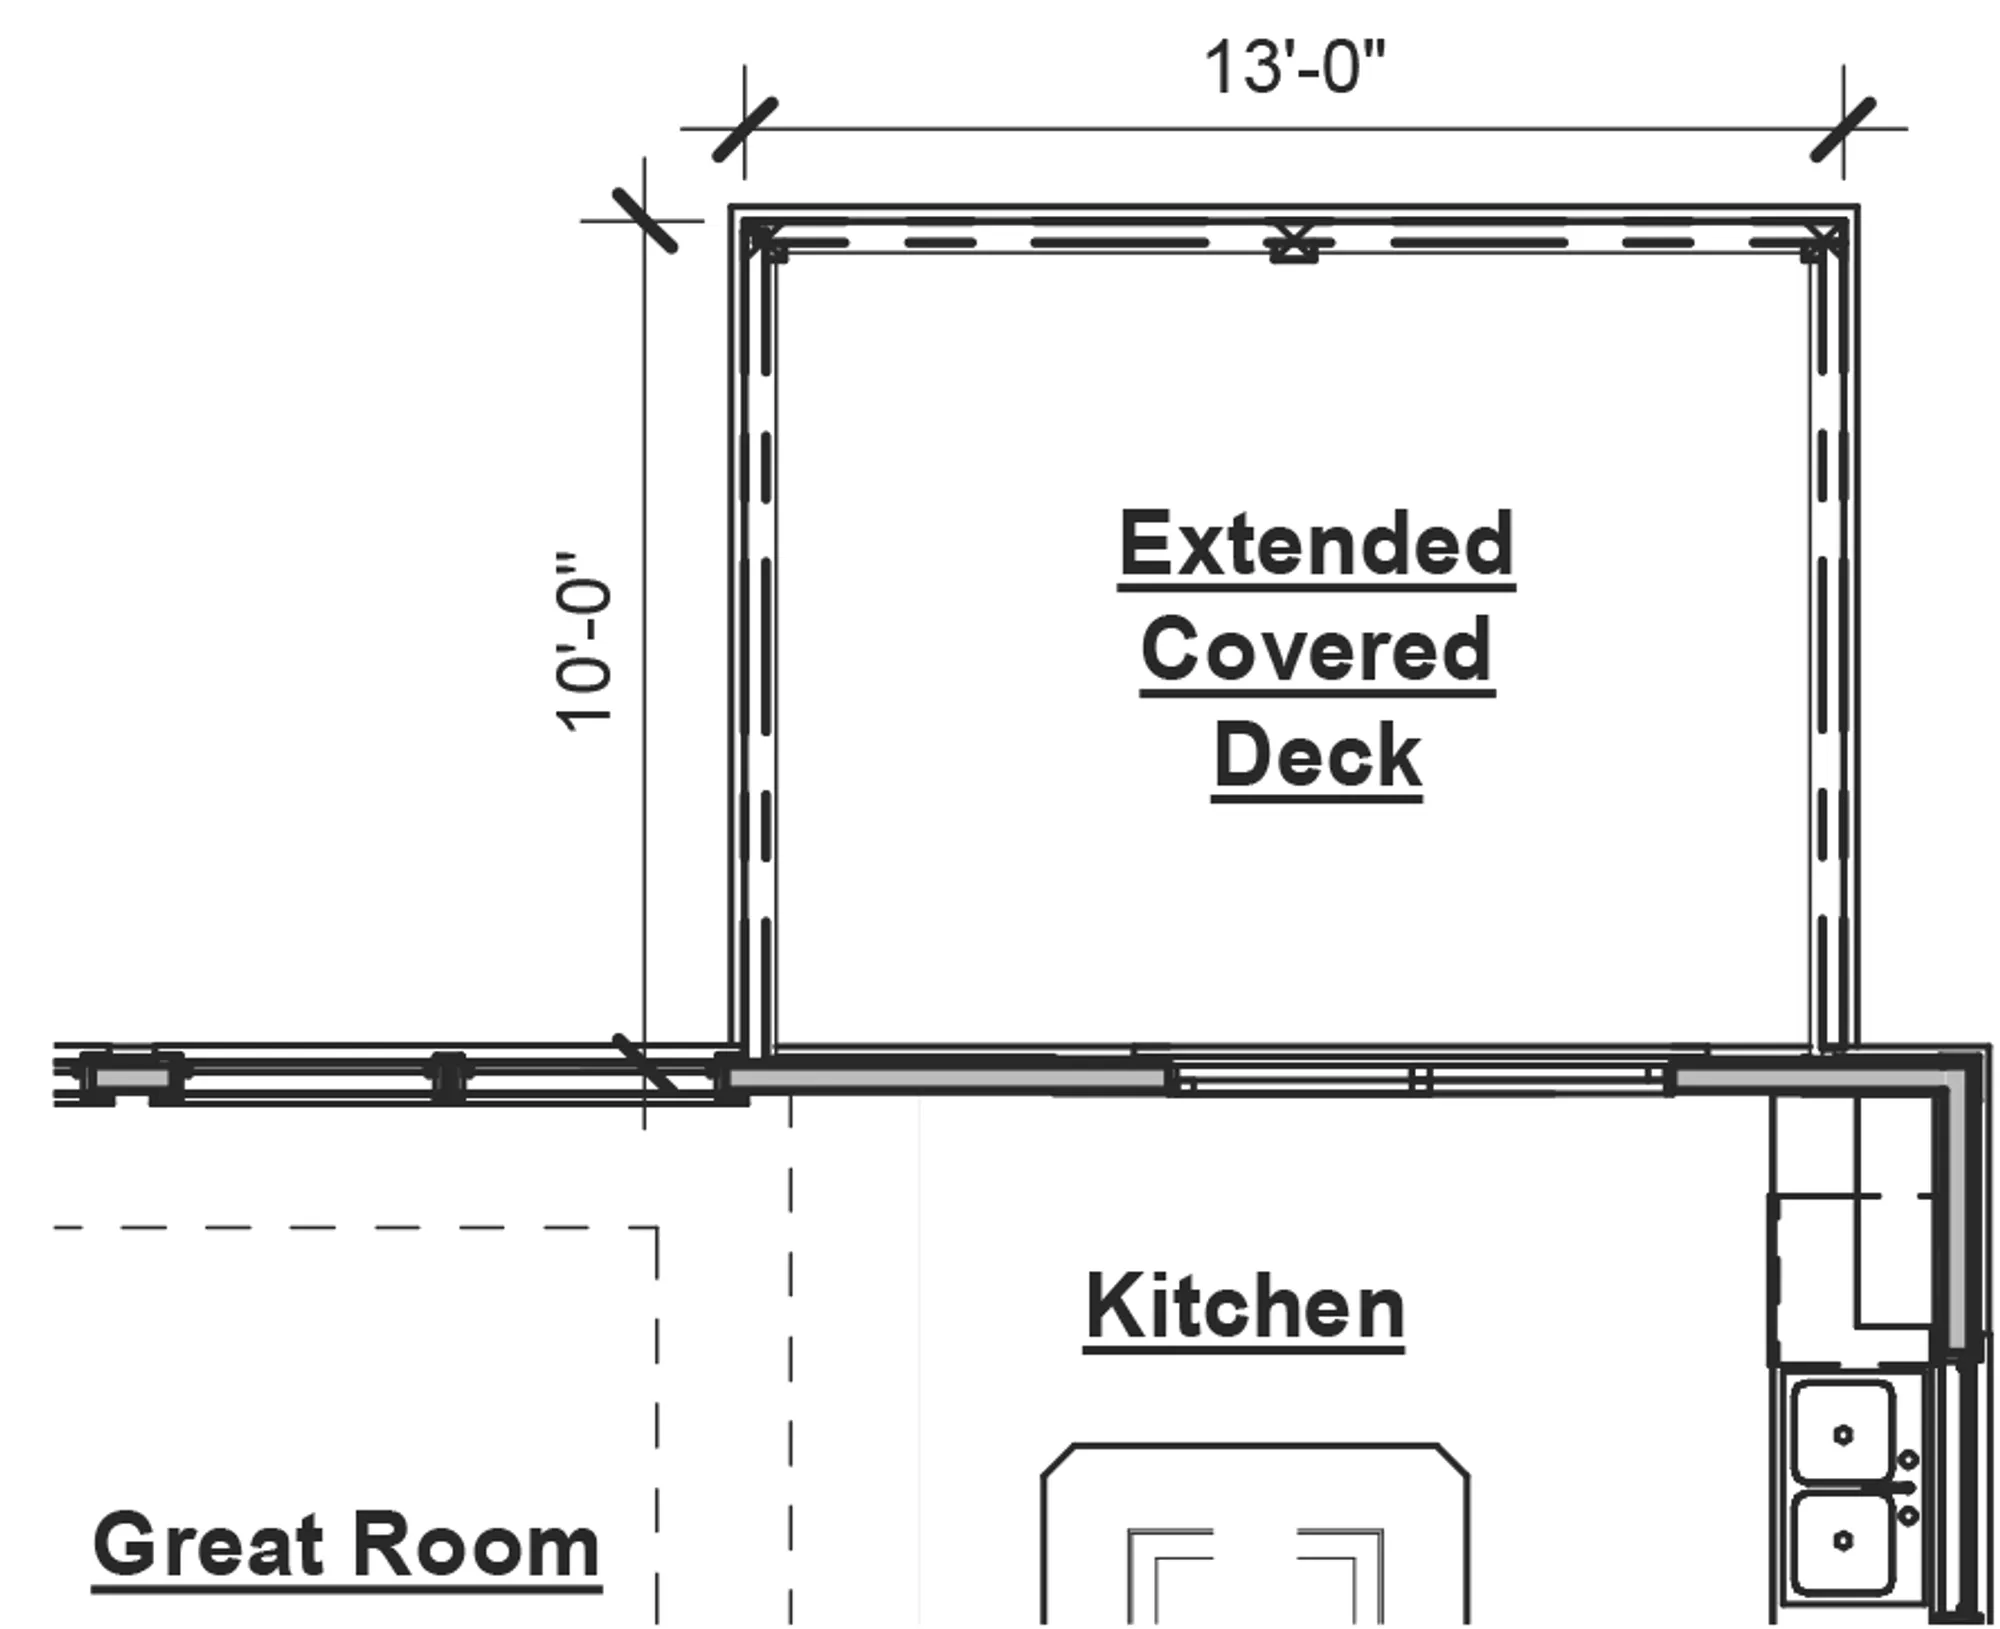 Extended Covered Deck Option - undefined